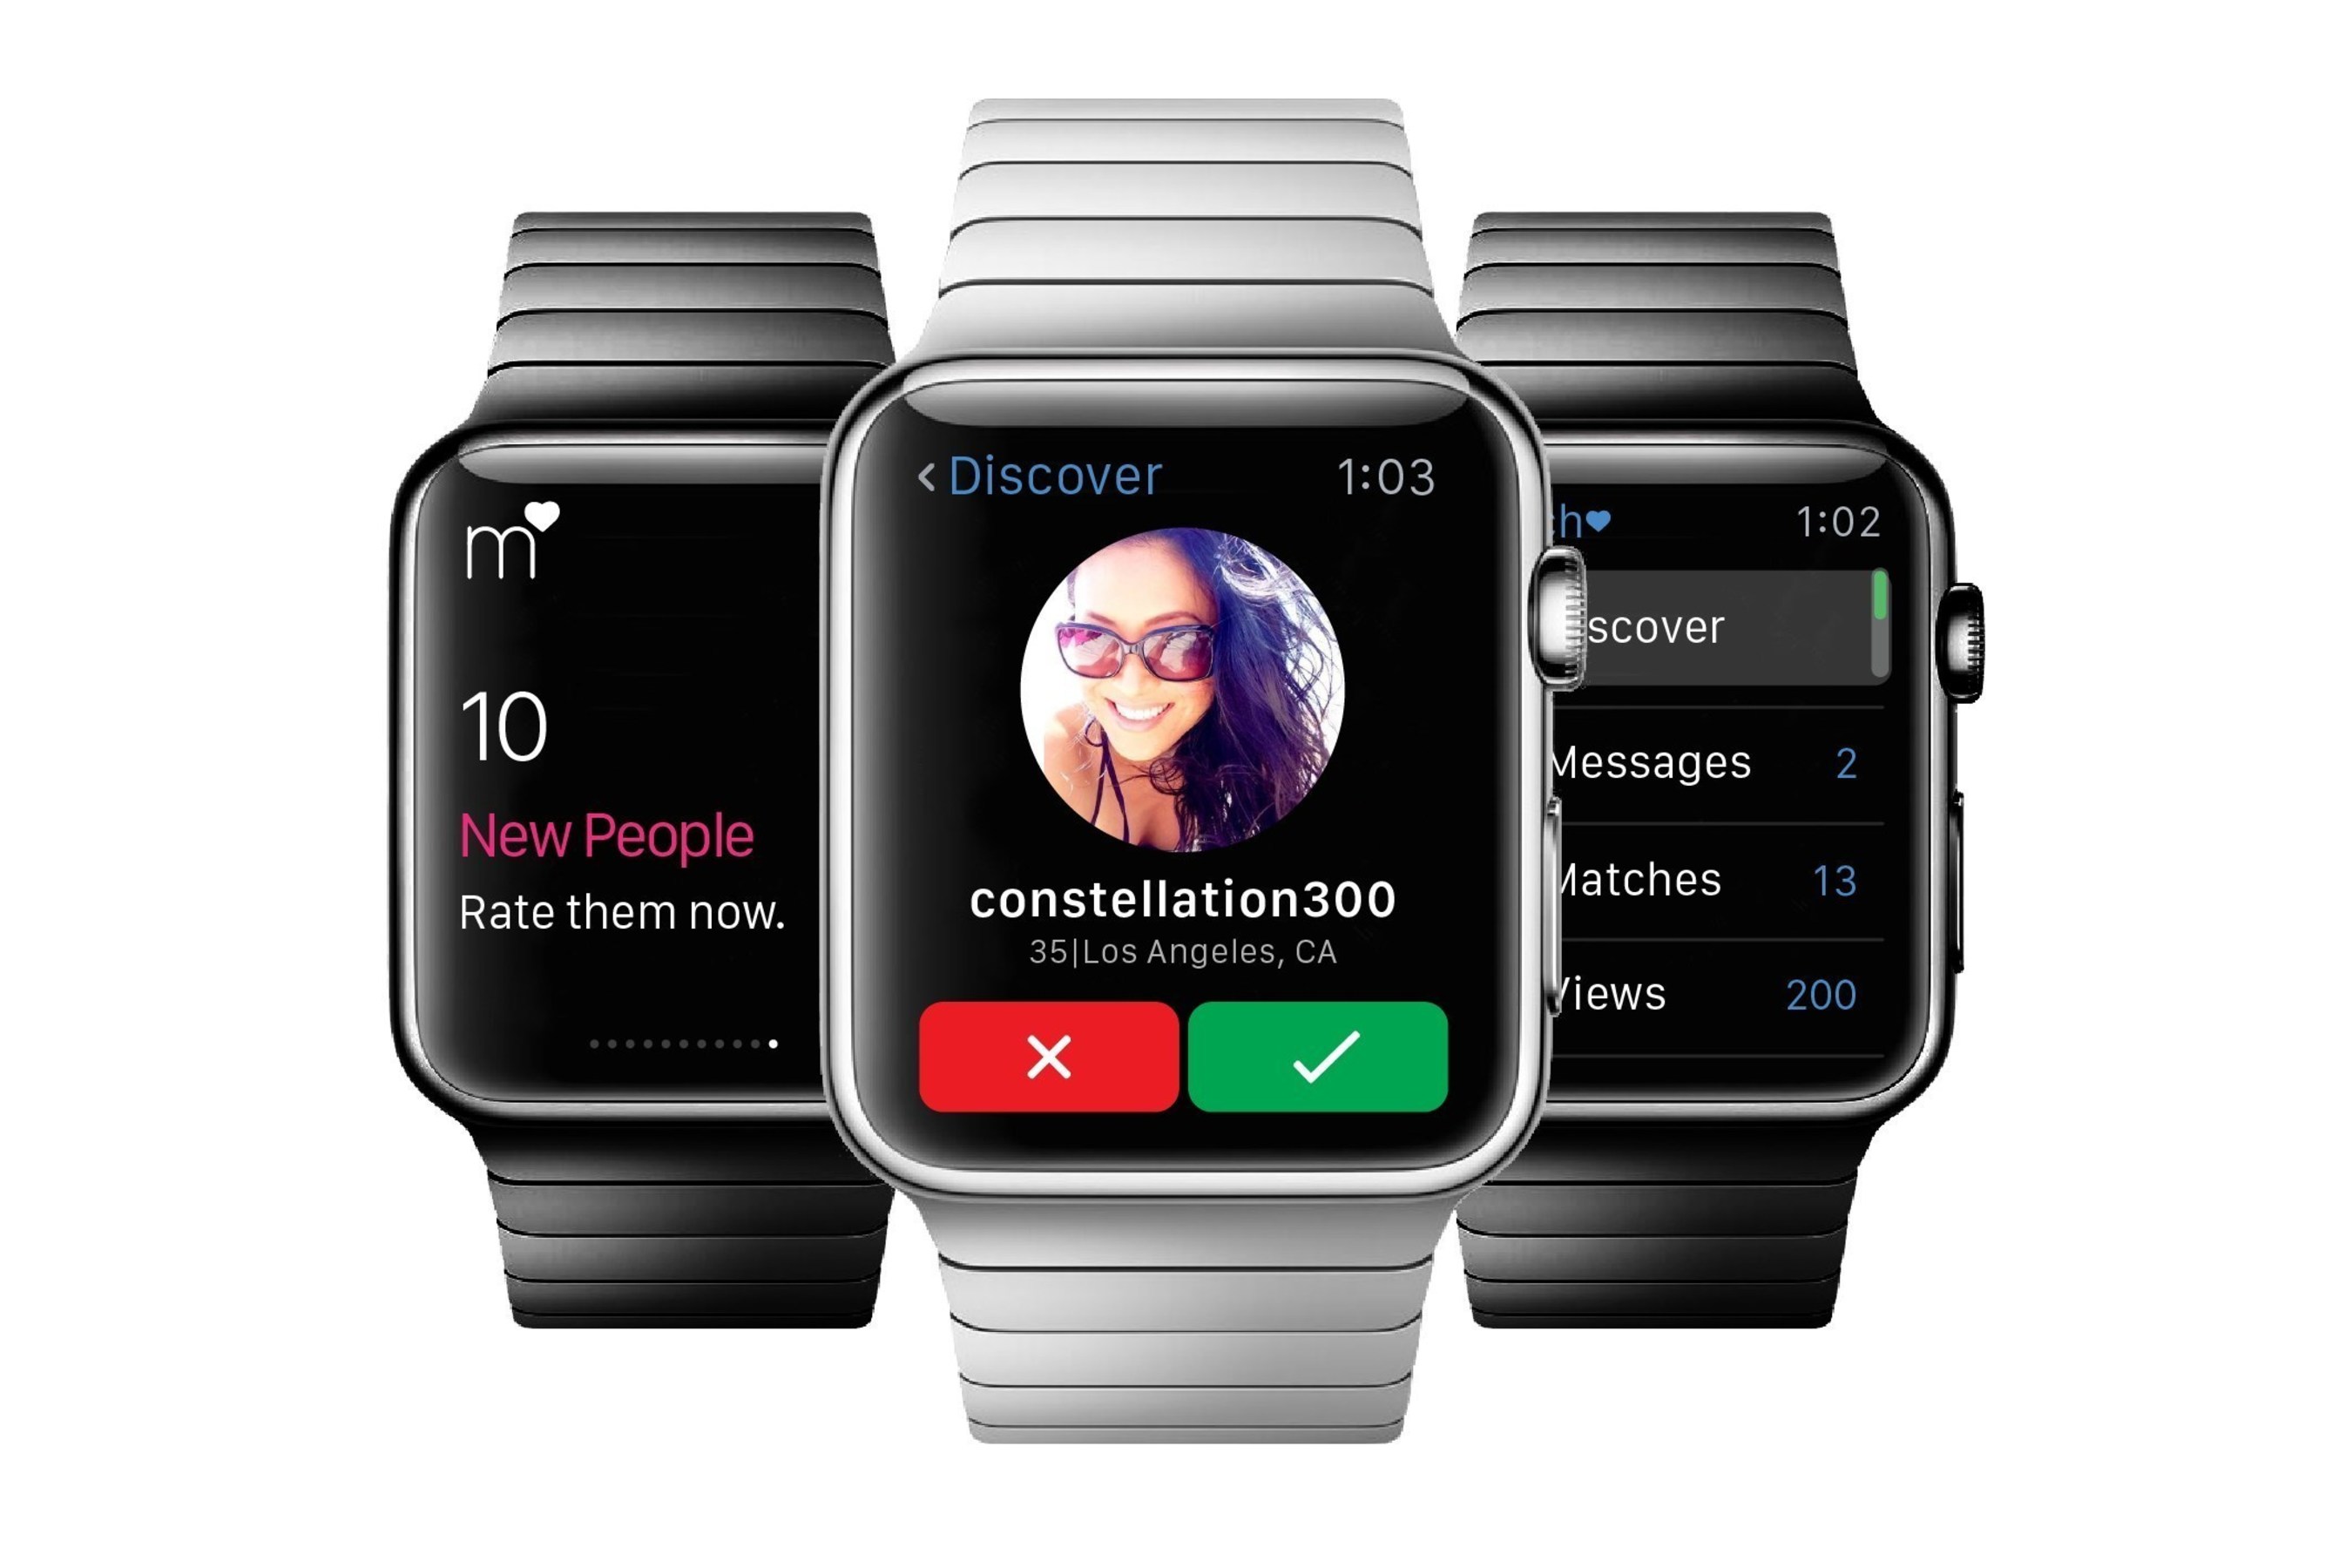 Match App for the Apple Watch